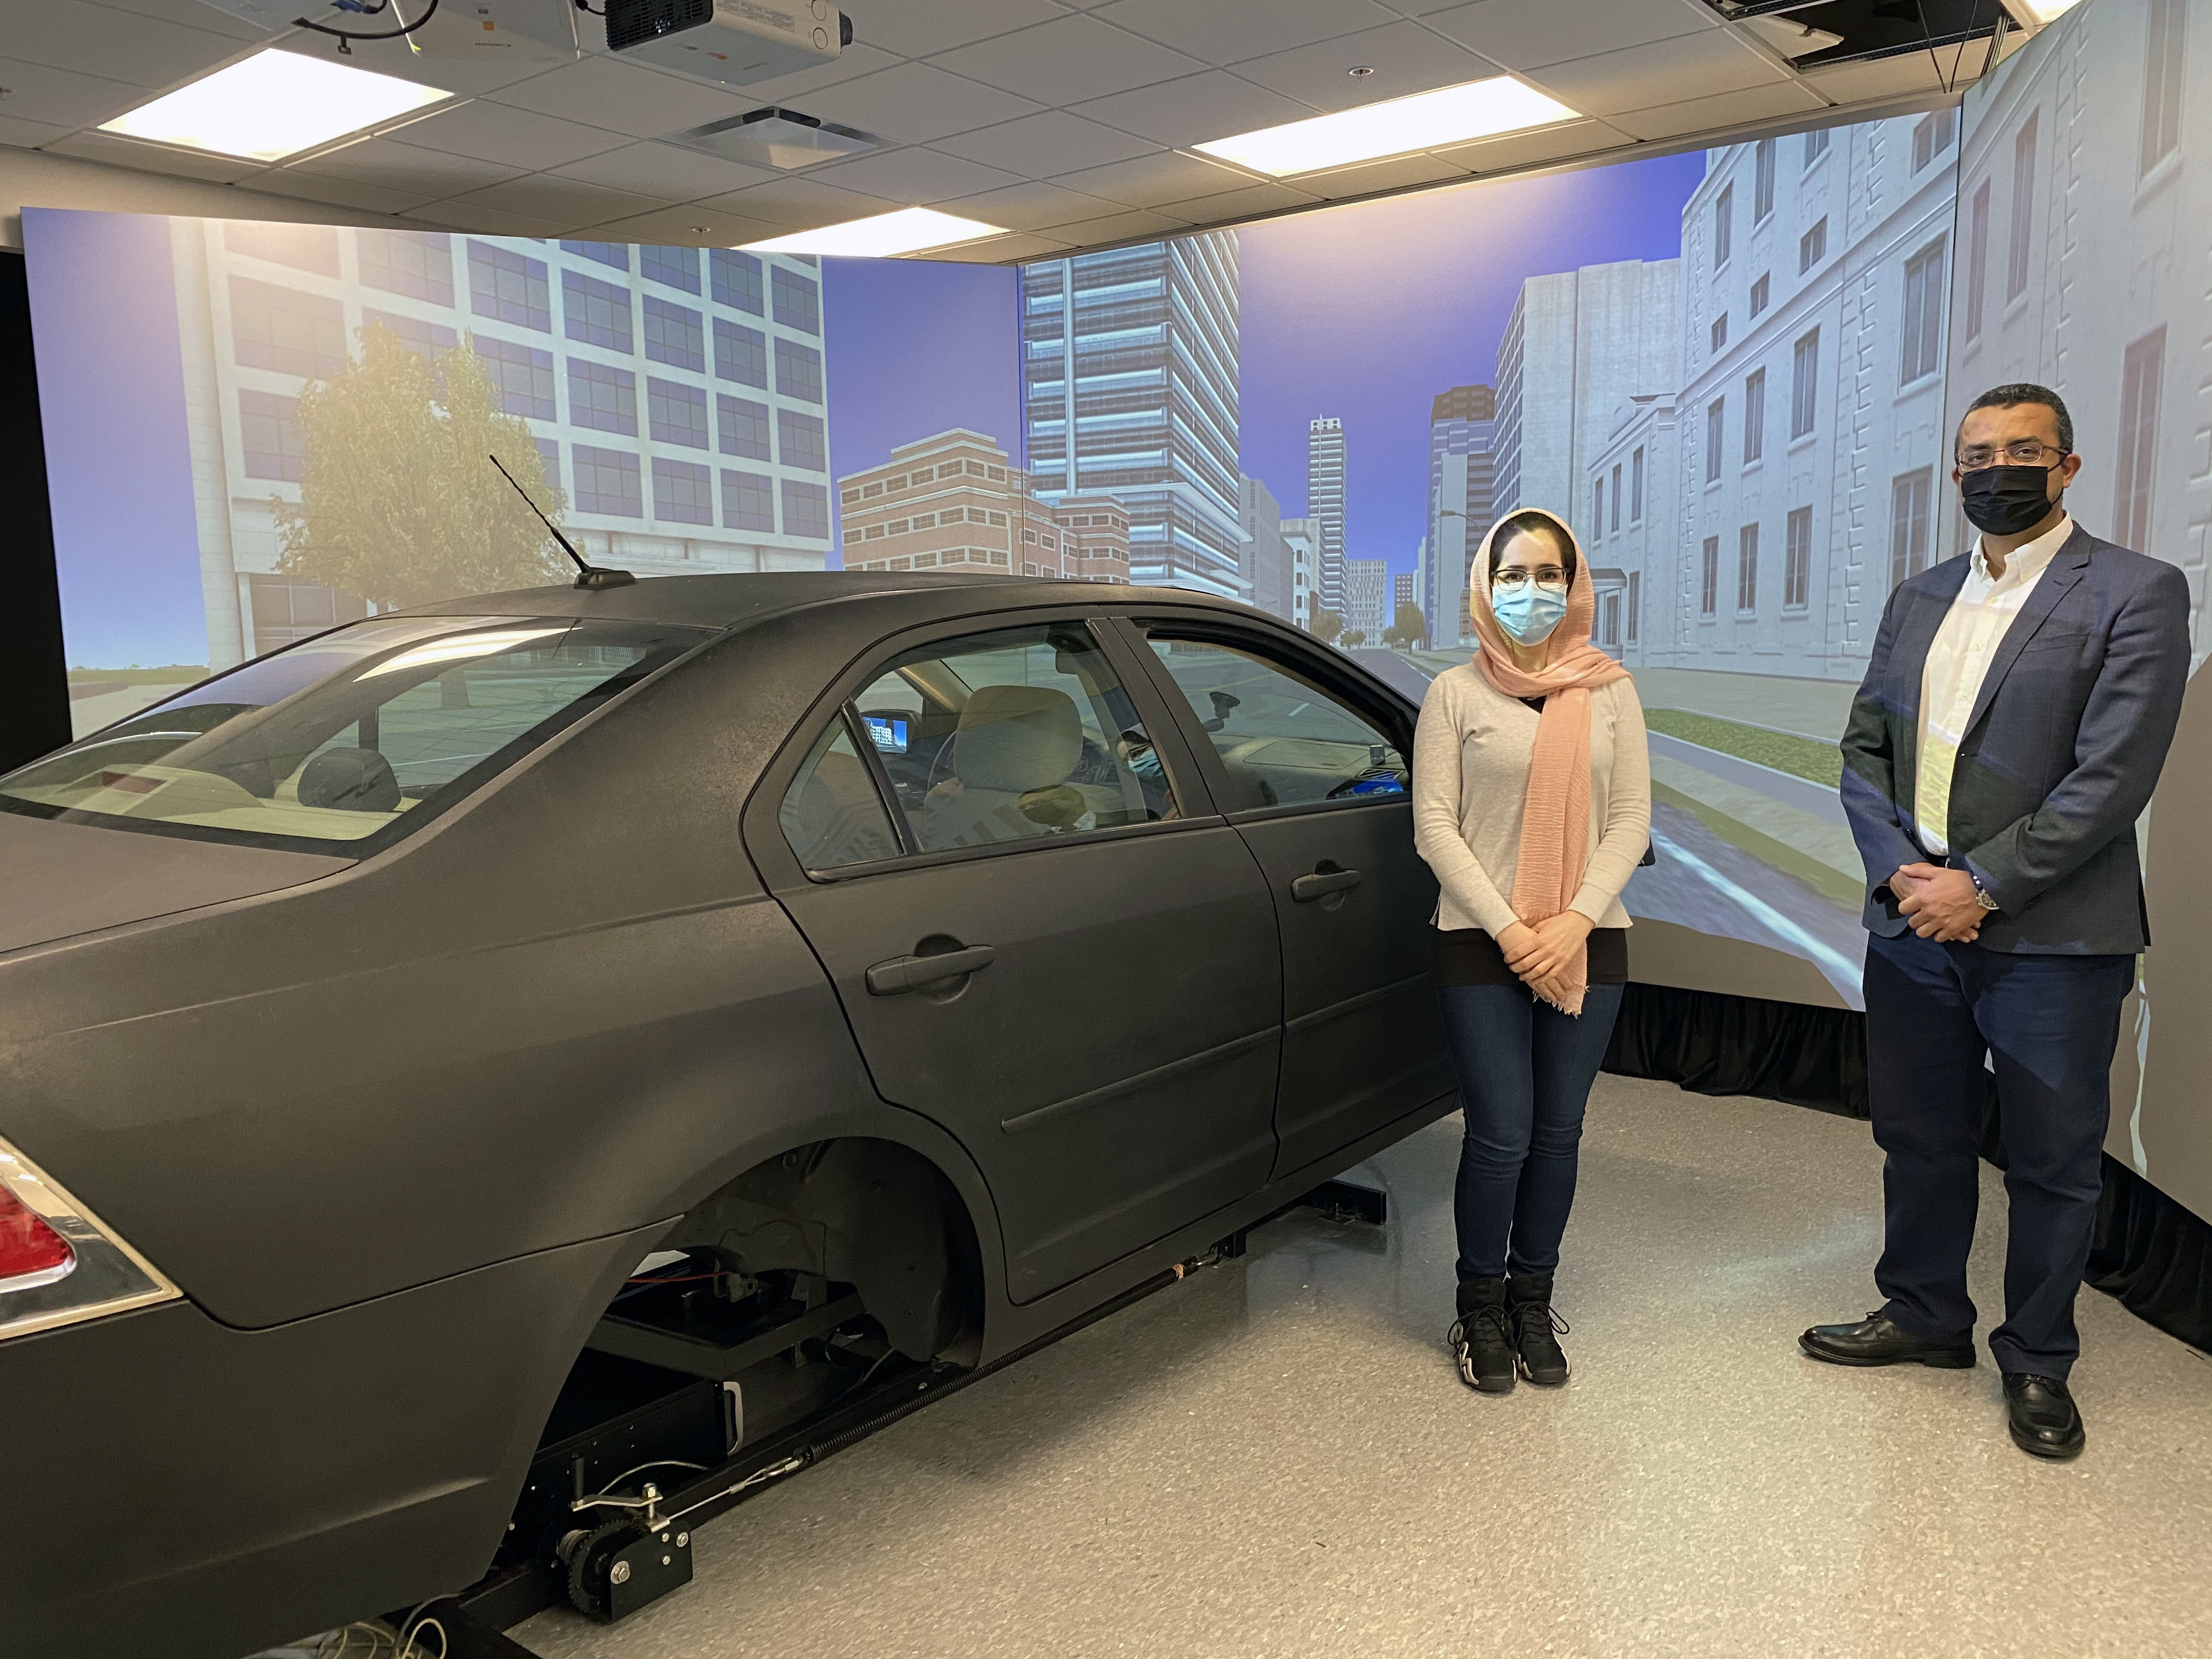 LSU Civil Engineering Assistant Professor Hany Hassan (right) conducts research in the college's driving simulator as part of his study into senior citizens' driving behavior in various traffic and environmental conditions.